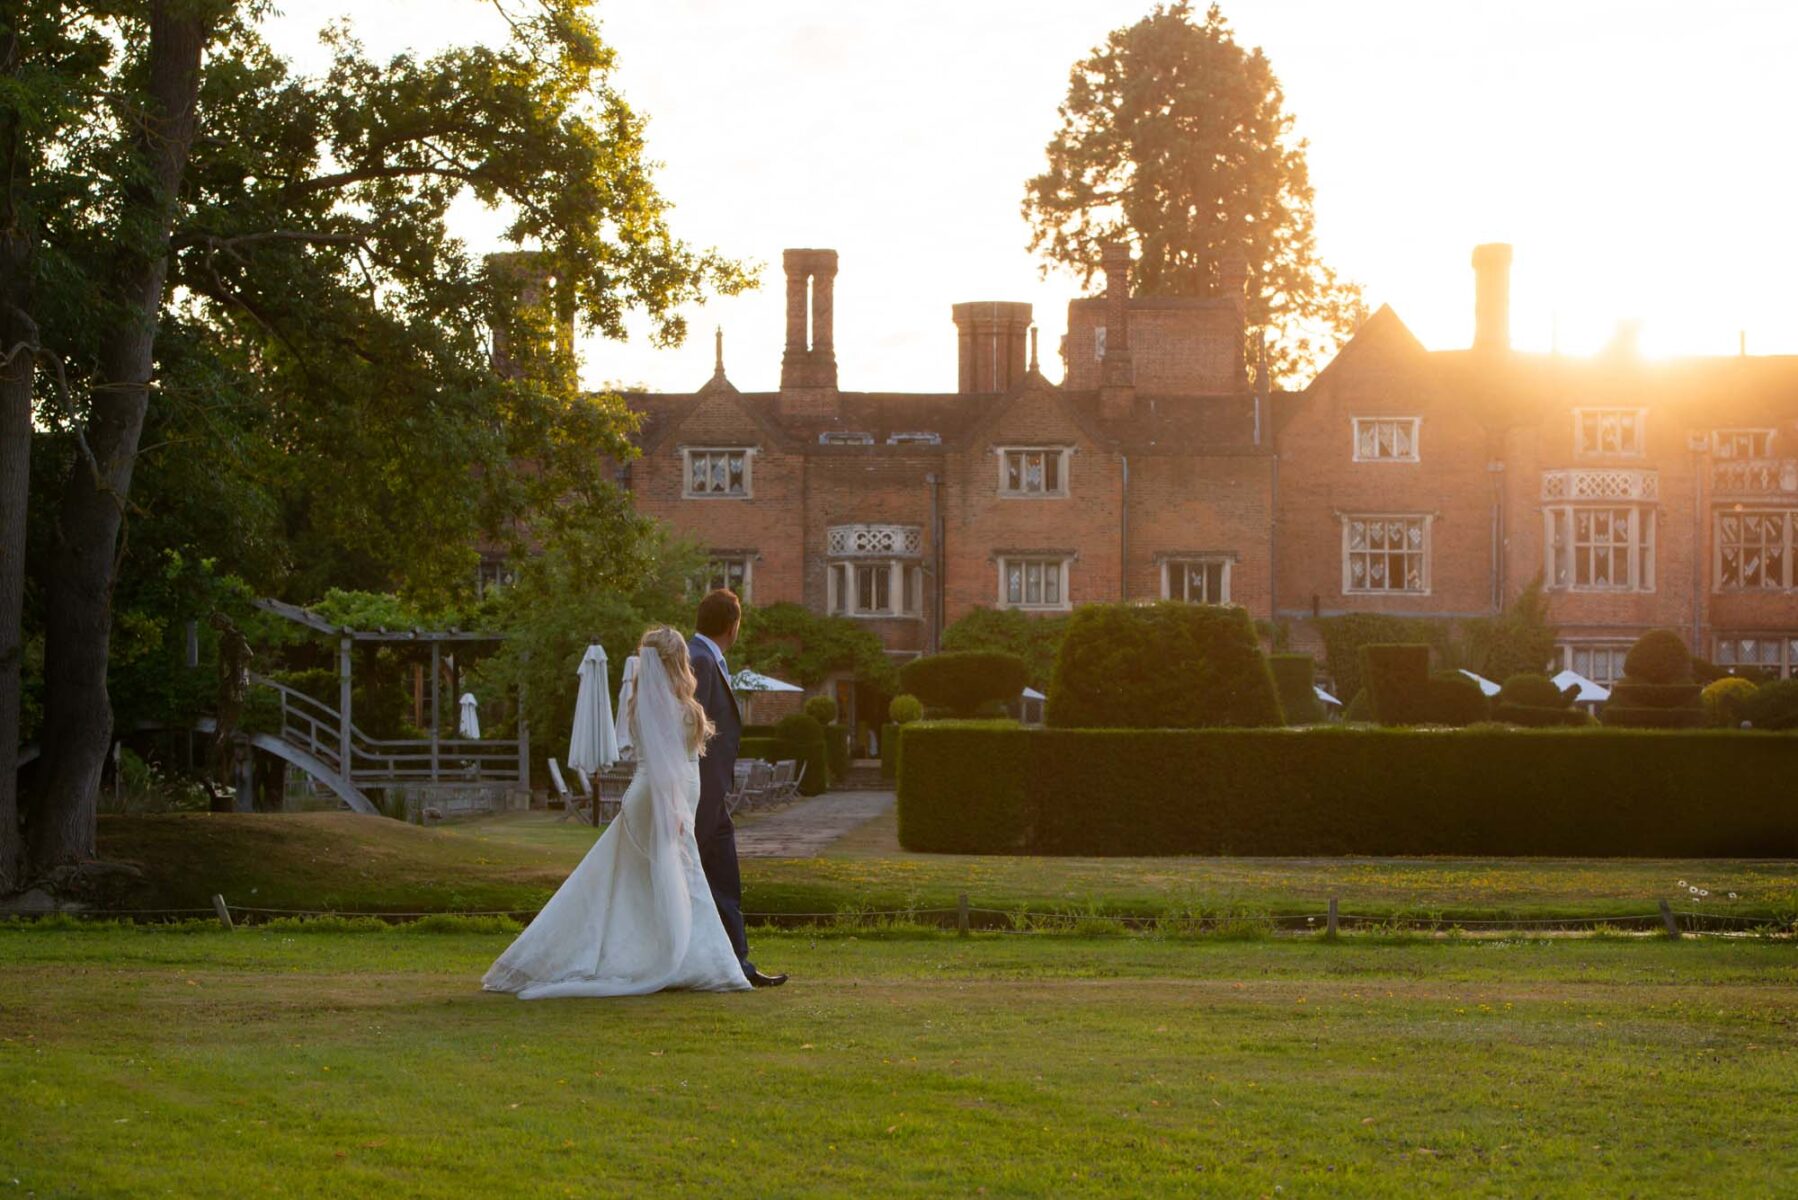 Couple walking in the grounds of Great Fosters after wedding